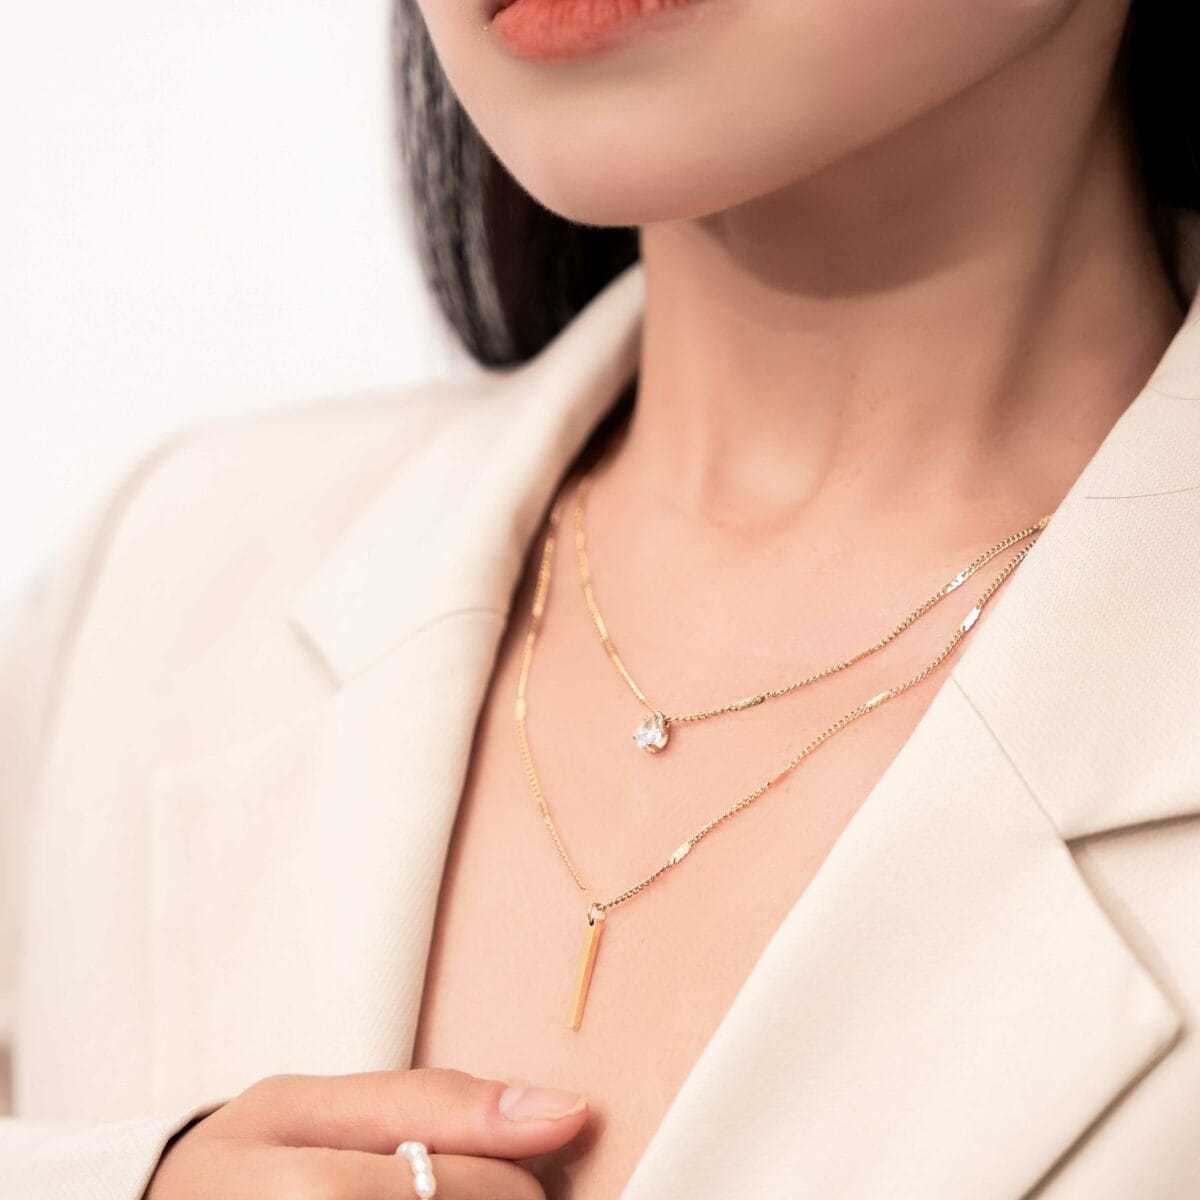 https://m.clubbella.co/product/layered-solitaire-vertical-bar-necklace/ Resized (98 of 134)